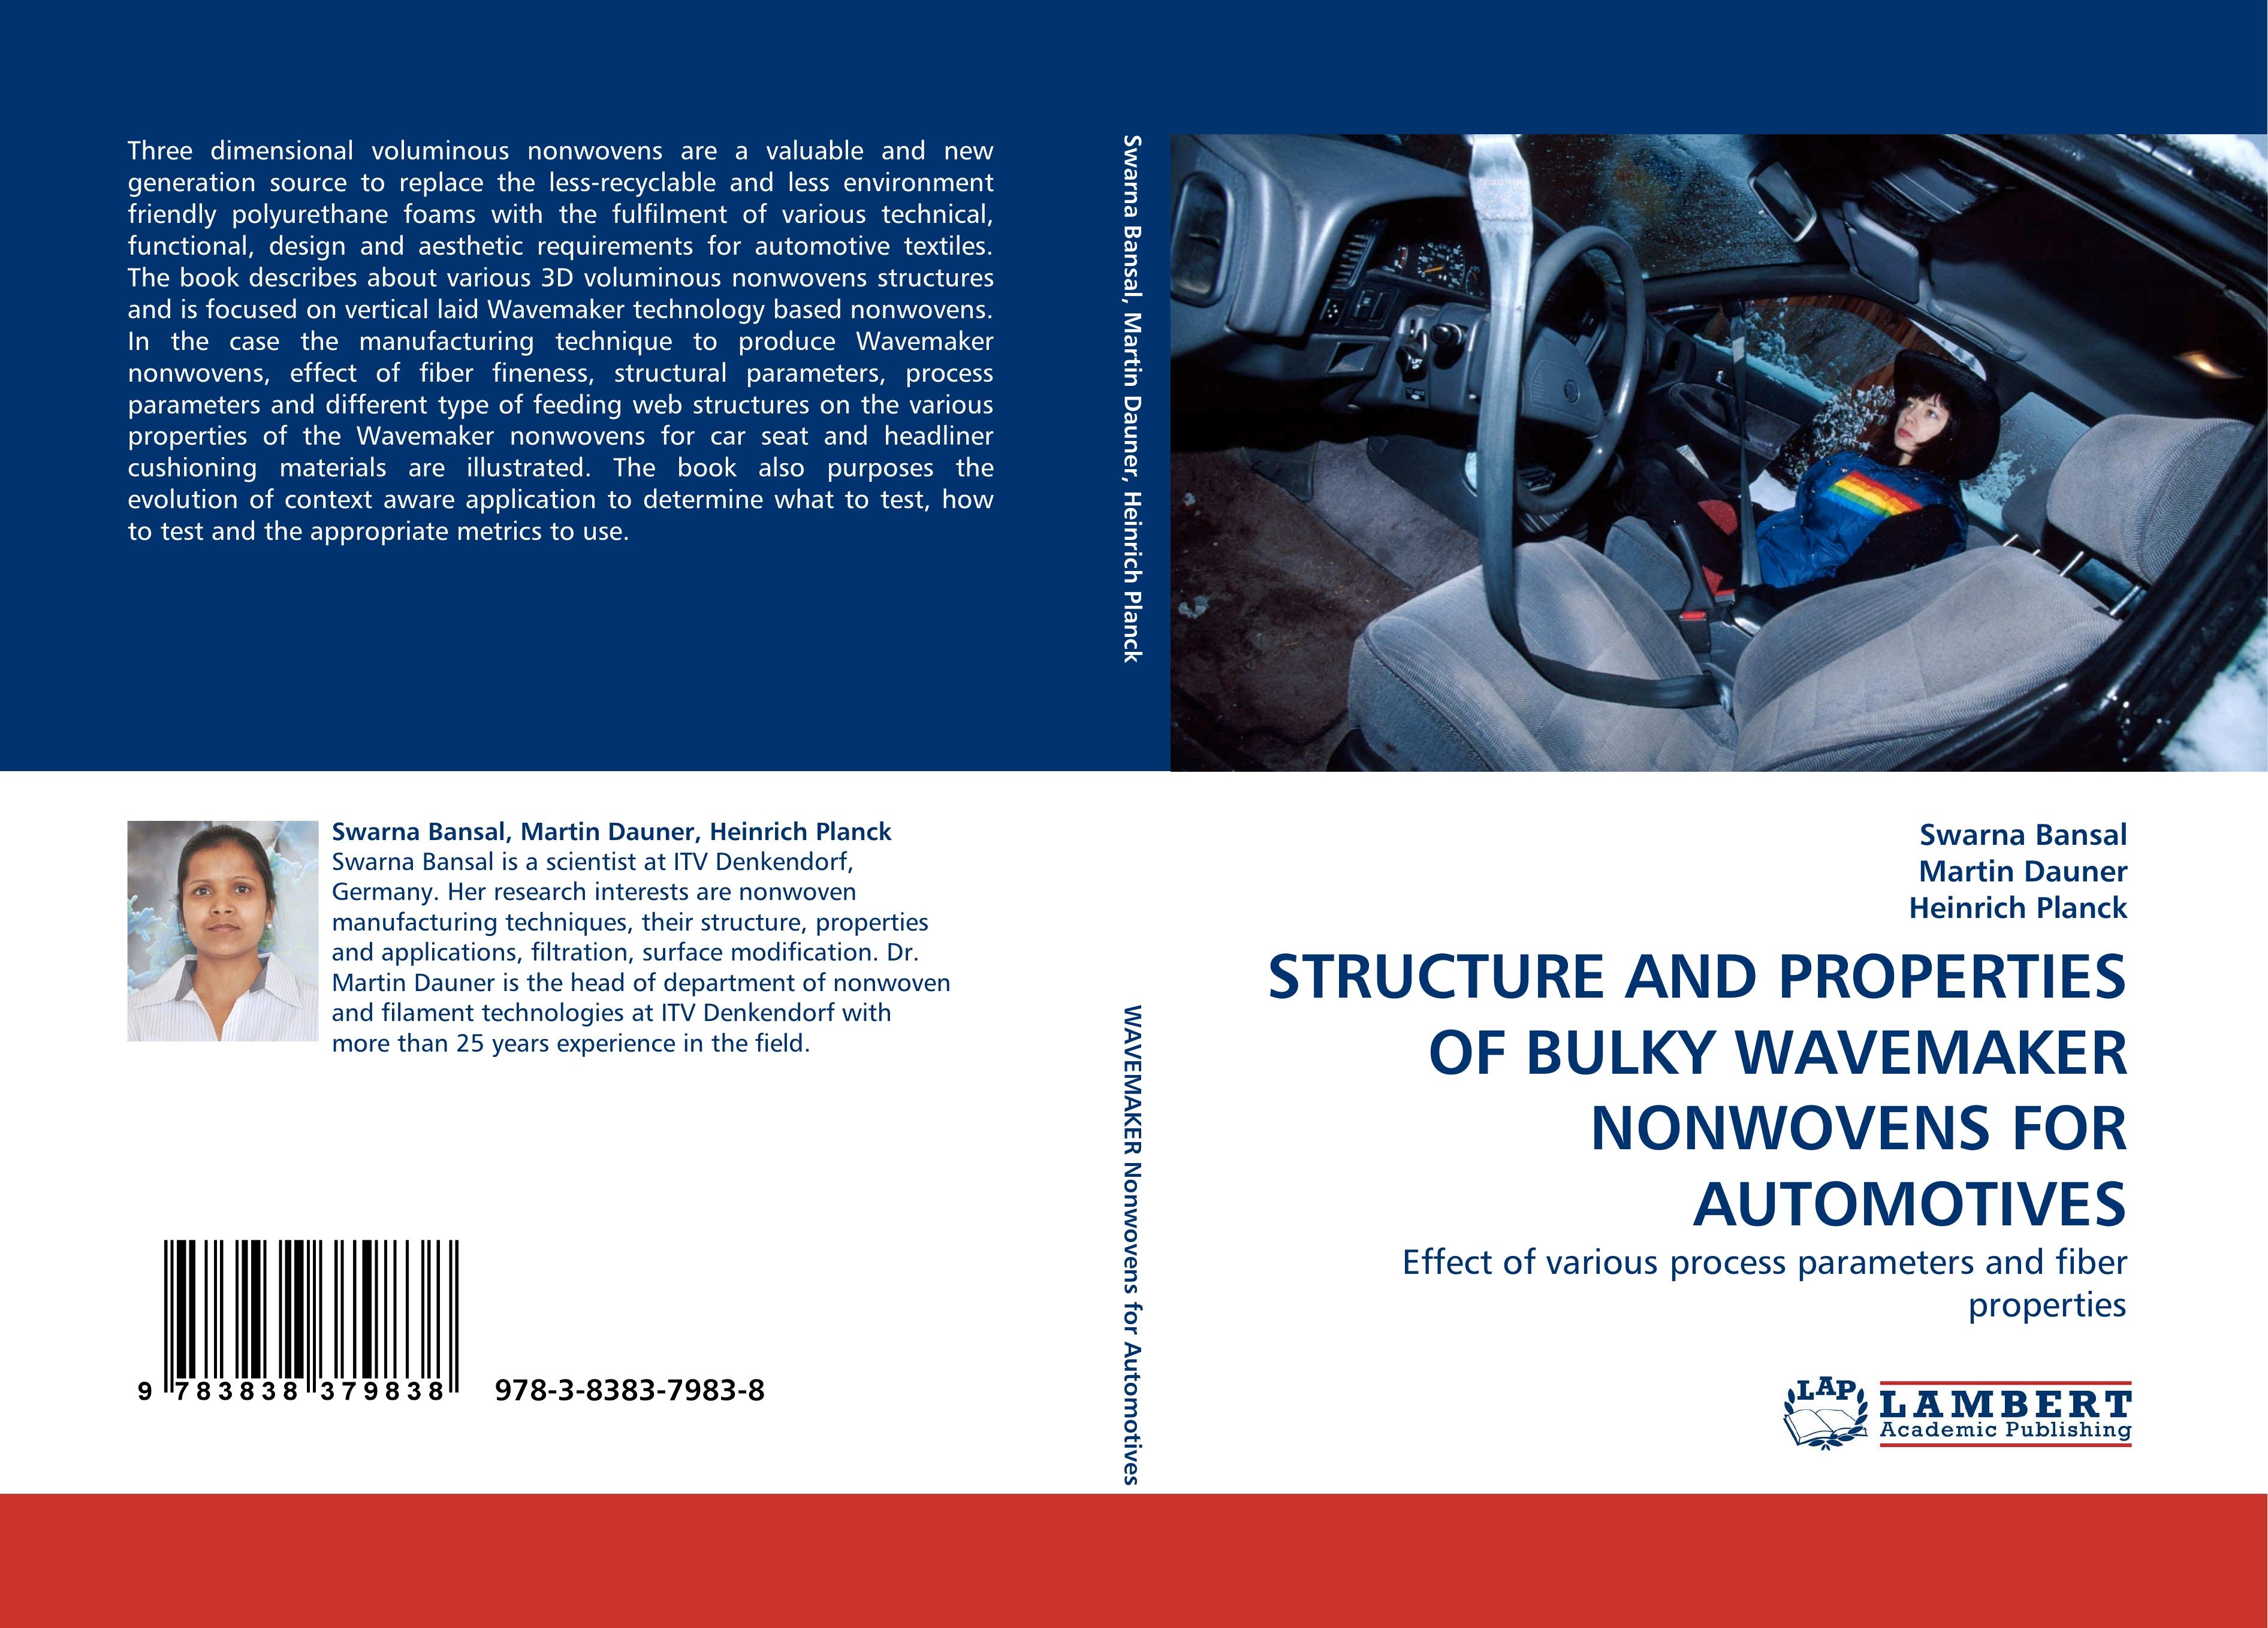 STRUCTURE AND PROPERTIES OF BULKY WAVEMAKER NONWOVENS FOR AUTOMOTIVES - Swarna Bansal Martin Dauner Heinrich Planck